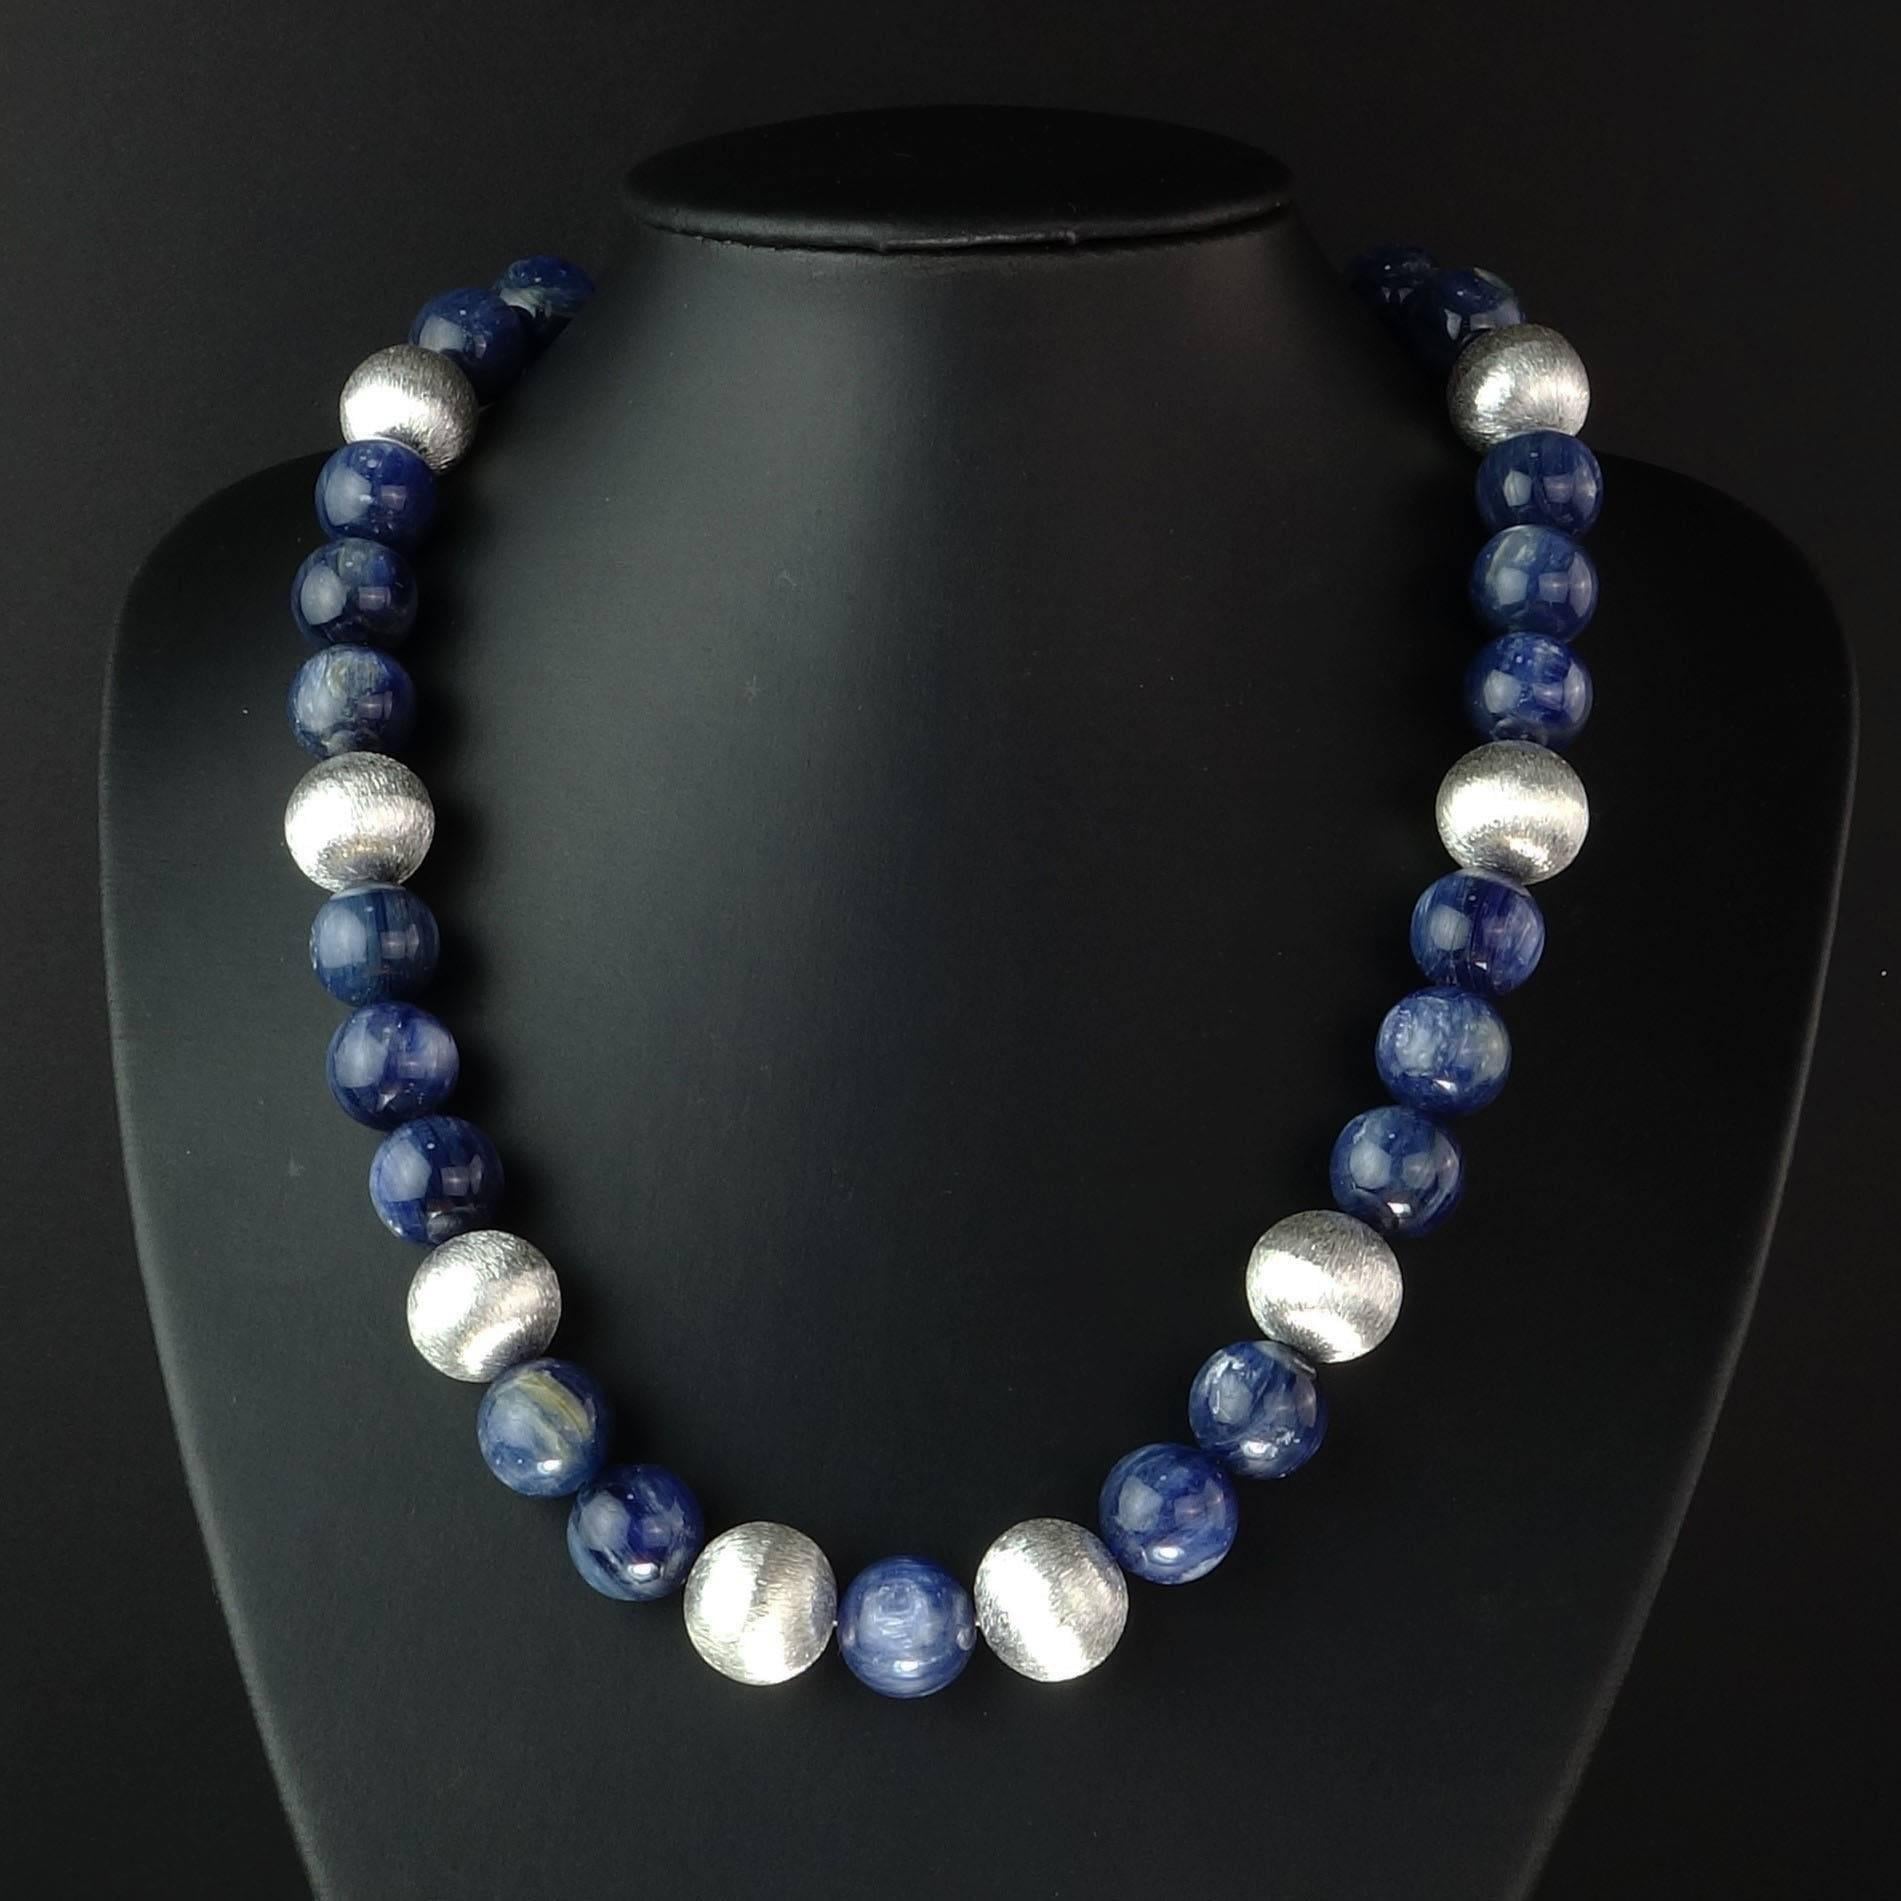 Women's Gorgeous Kyanite and Silver Necklace with Sterling Silver Clasp